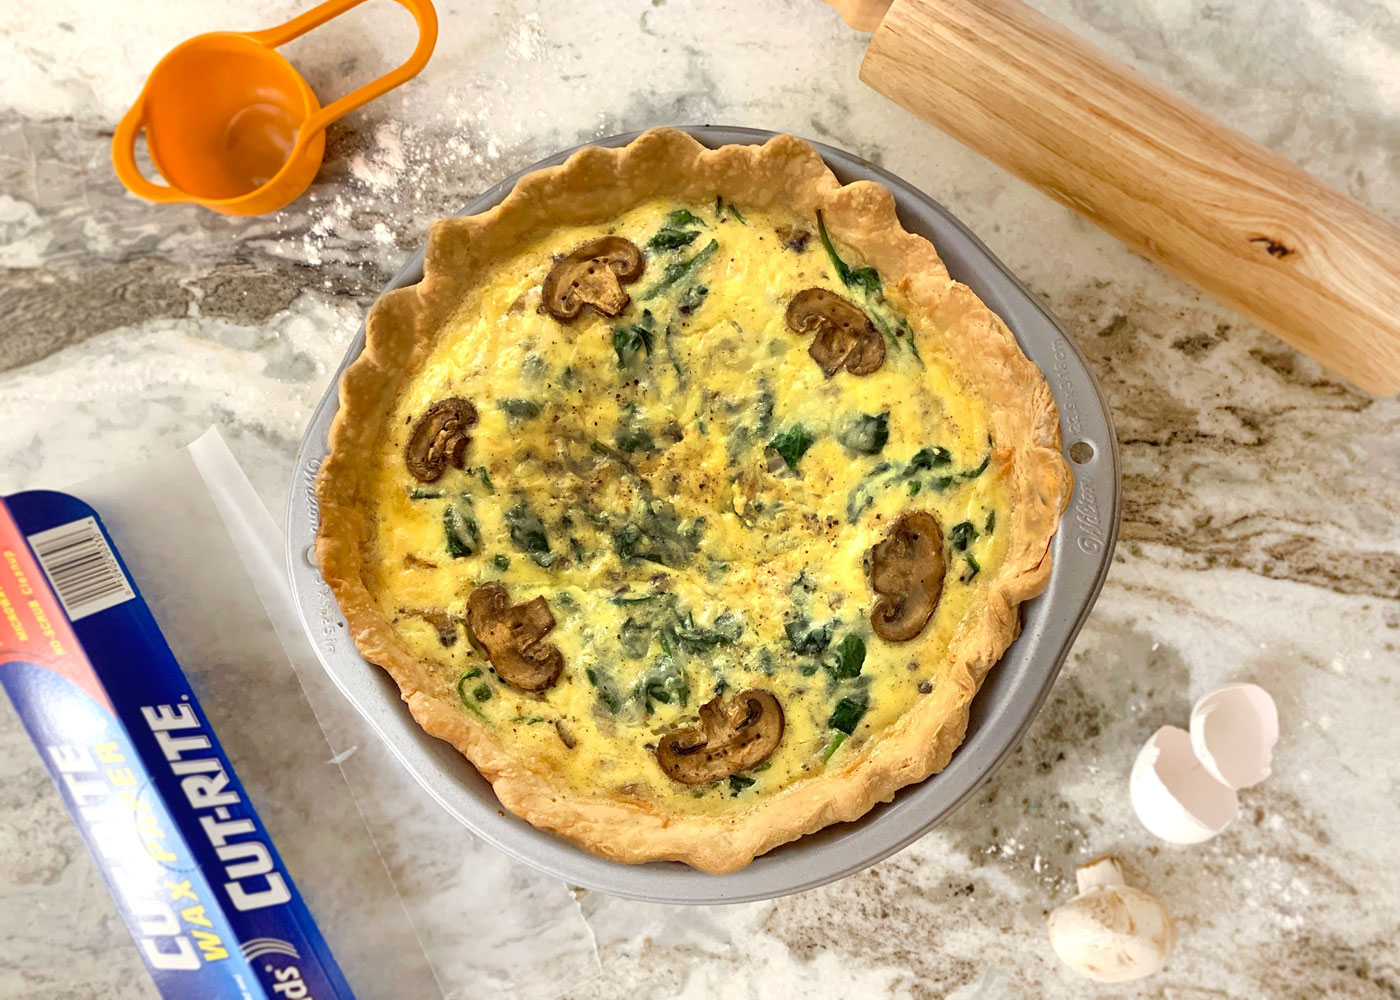 A deliciously flavorful and easy quiche for breakfast or brunch. The garlic, mushrooms, and spinach are perfectly complemented by the light and tangy gruyere/swiss blend added in. This quiche has the perfect texture, a satisfyingly light and crisp crust, and a taste you'll crave over and over again!